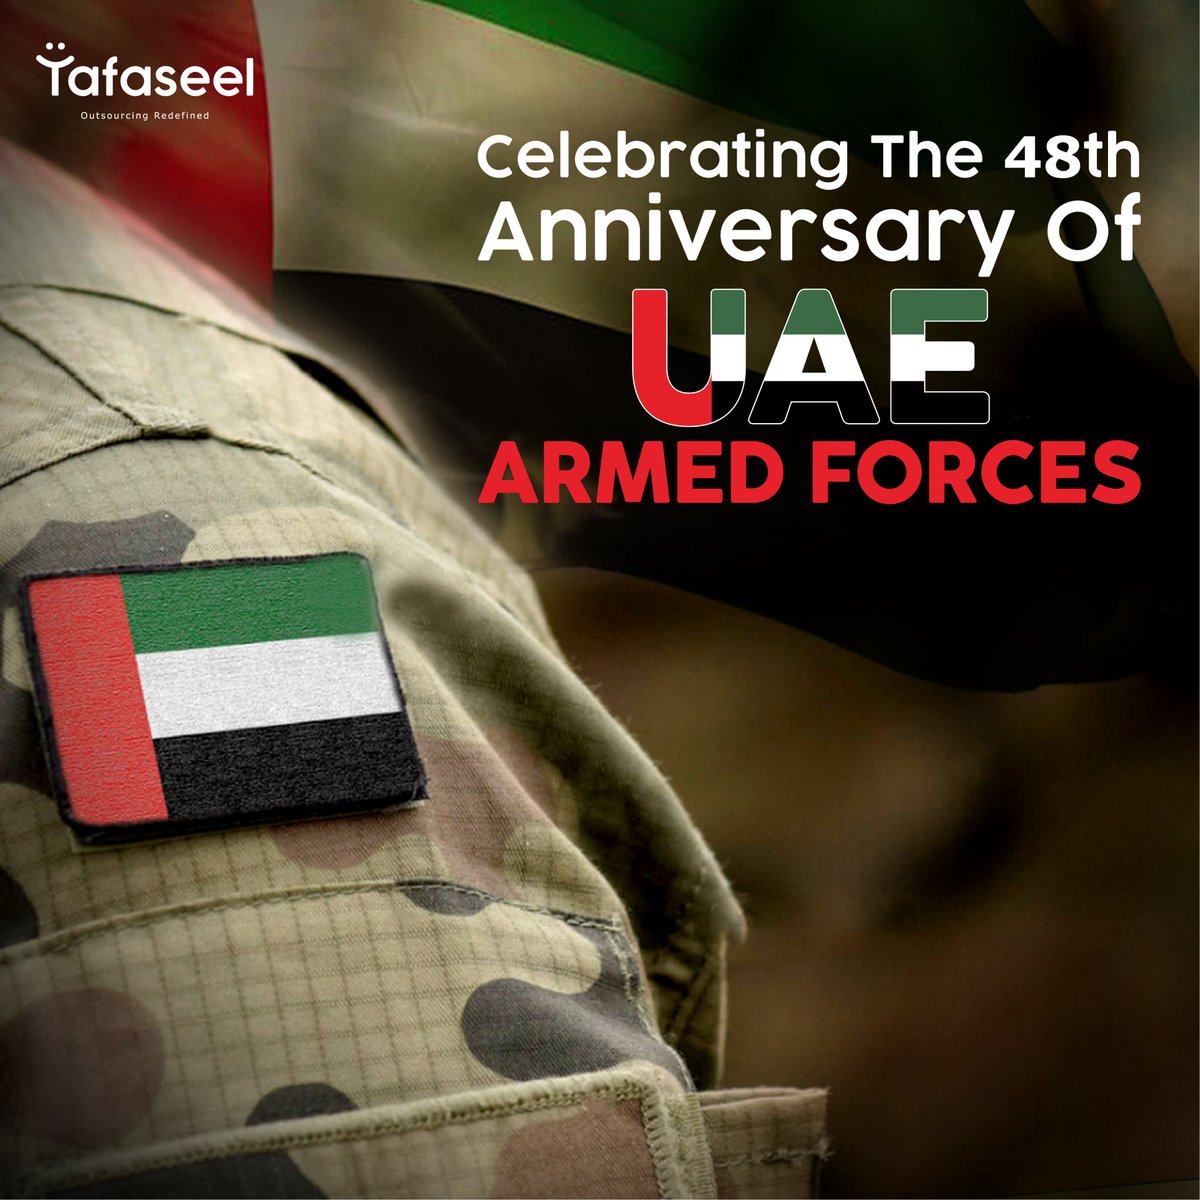 Celebrating 48 years of courage and commitment! Tafaseel BPO proudly salutes the UAE Armed Forces @modgovae for their steadfast service to the nation. Here's to many more years of peace and protection! 🇦🇪

#UAENationalPride #ArmedForcesDay